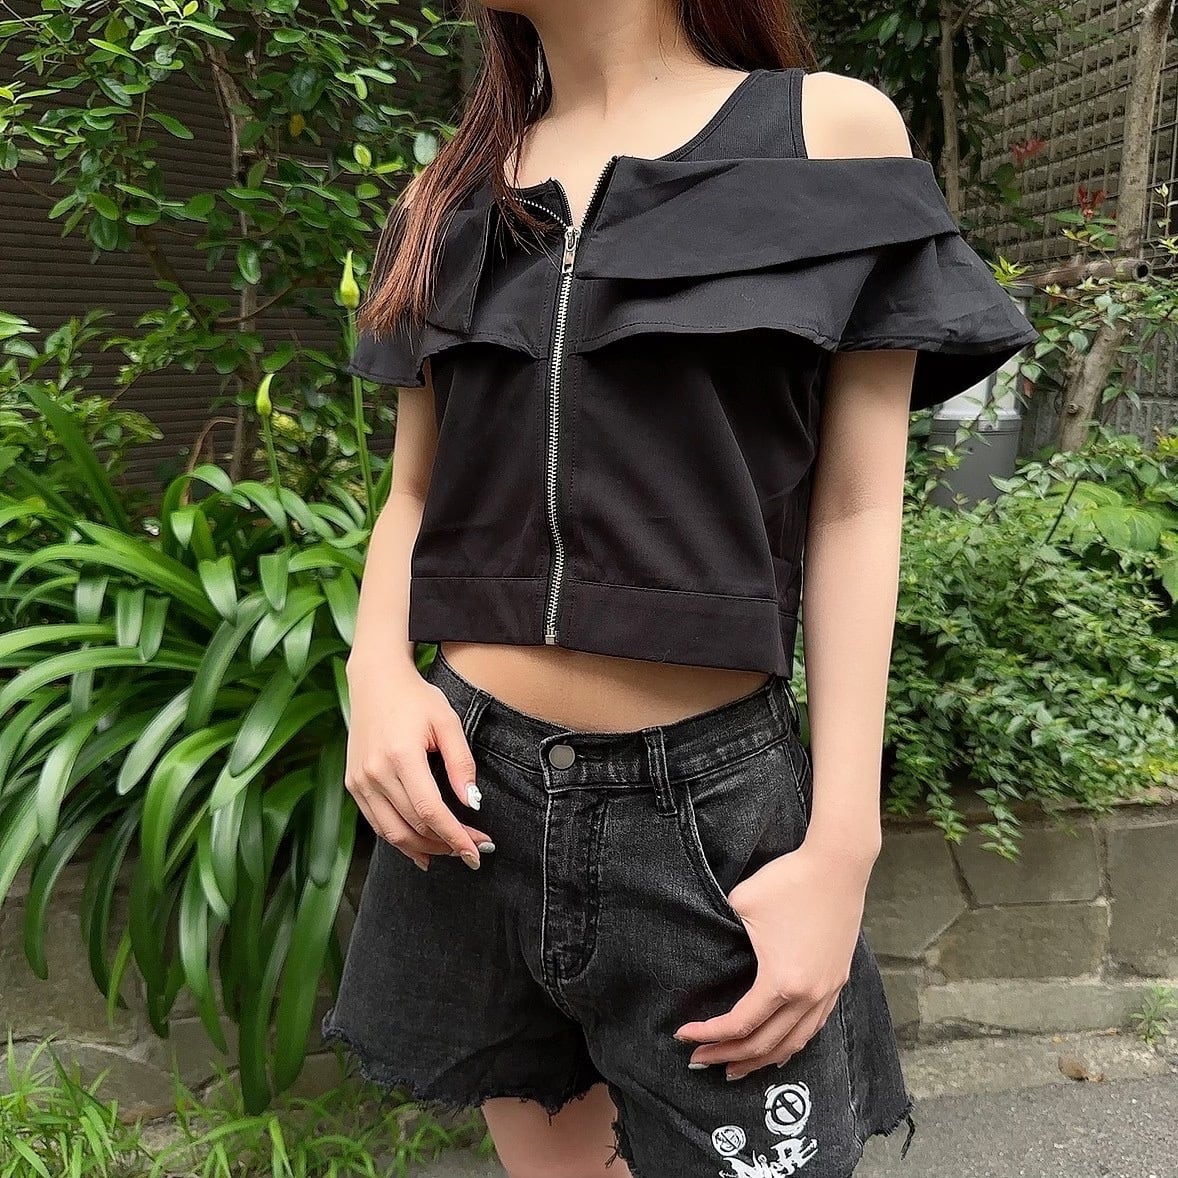 2WAY OFF-SHOULDER ZIP OUTER【袖切り離し可能】 | NIER CLOTHING powered by BASE